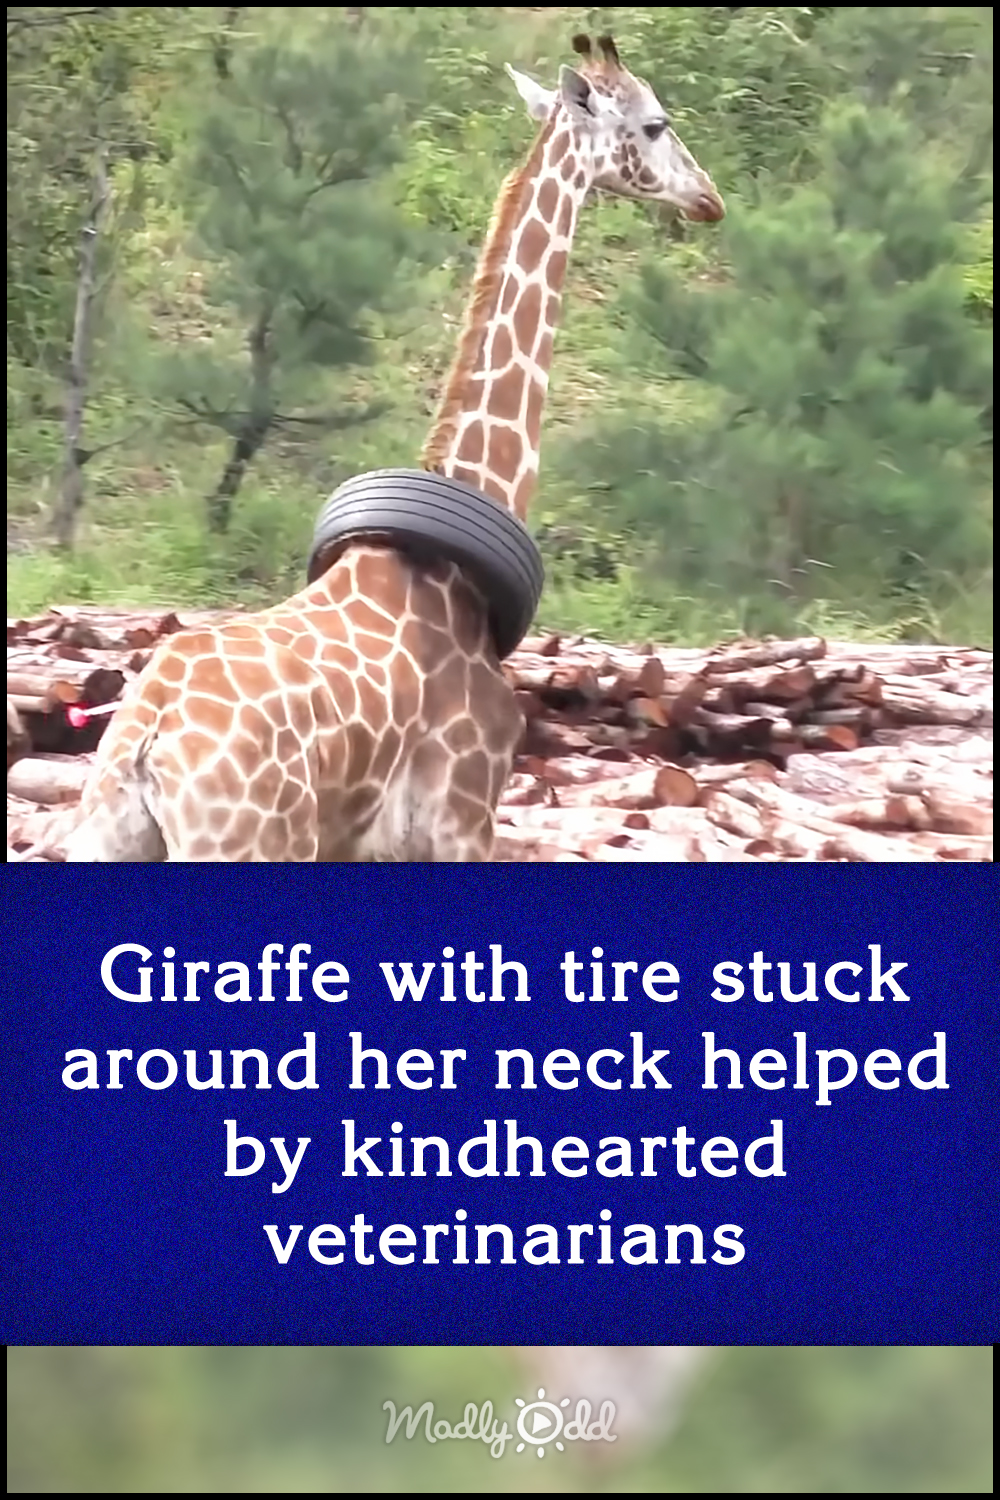 Giraffe with tire stuck around her neck helped by kindhearted veterinarians